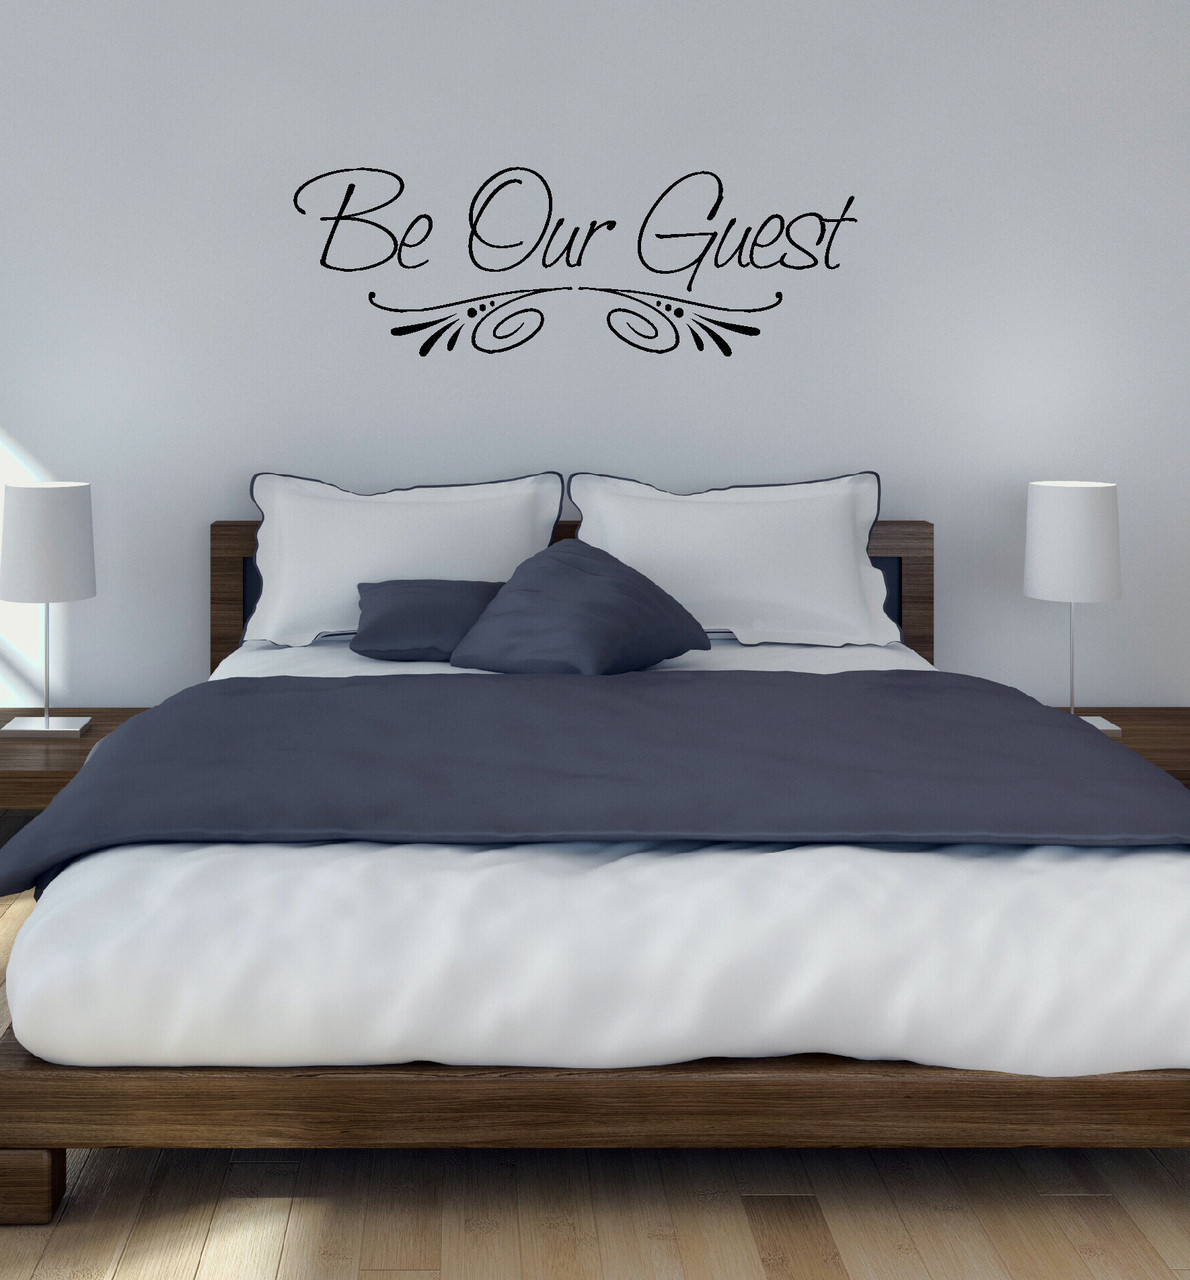 Wall Decal Quotes For Bedroom
 Be Our Guest Wall Decal Sticker for Home Decor